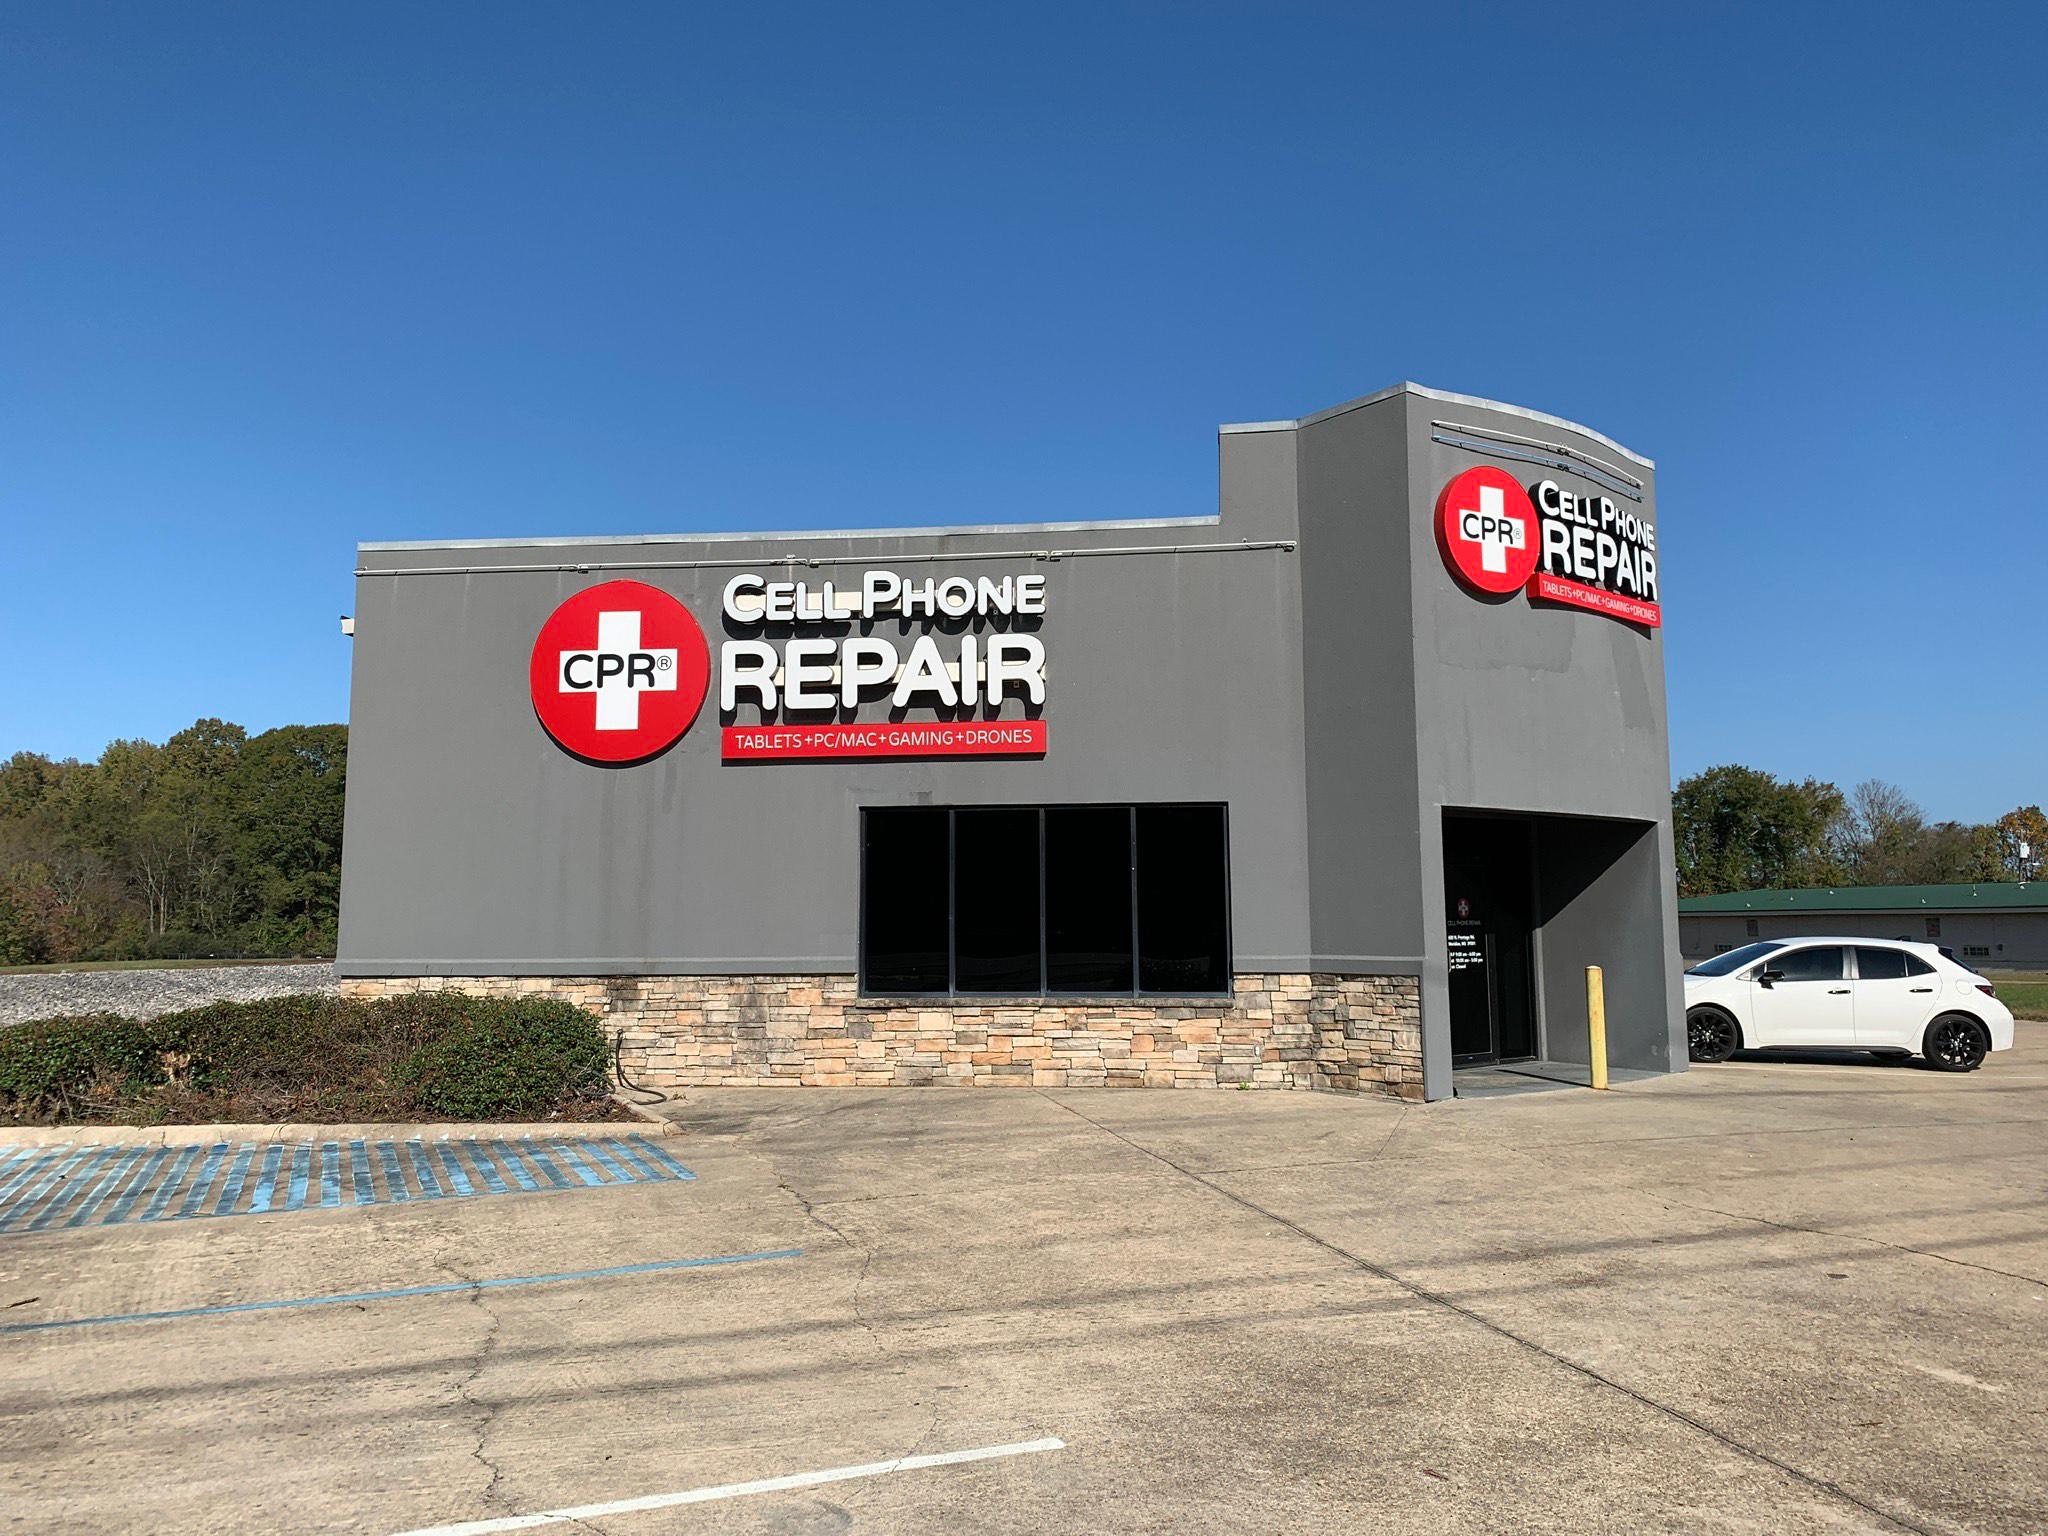 Storefront Image of CPR Cell Phone Repair Meridian MS